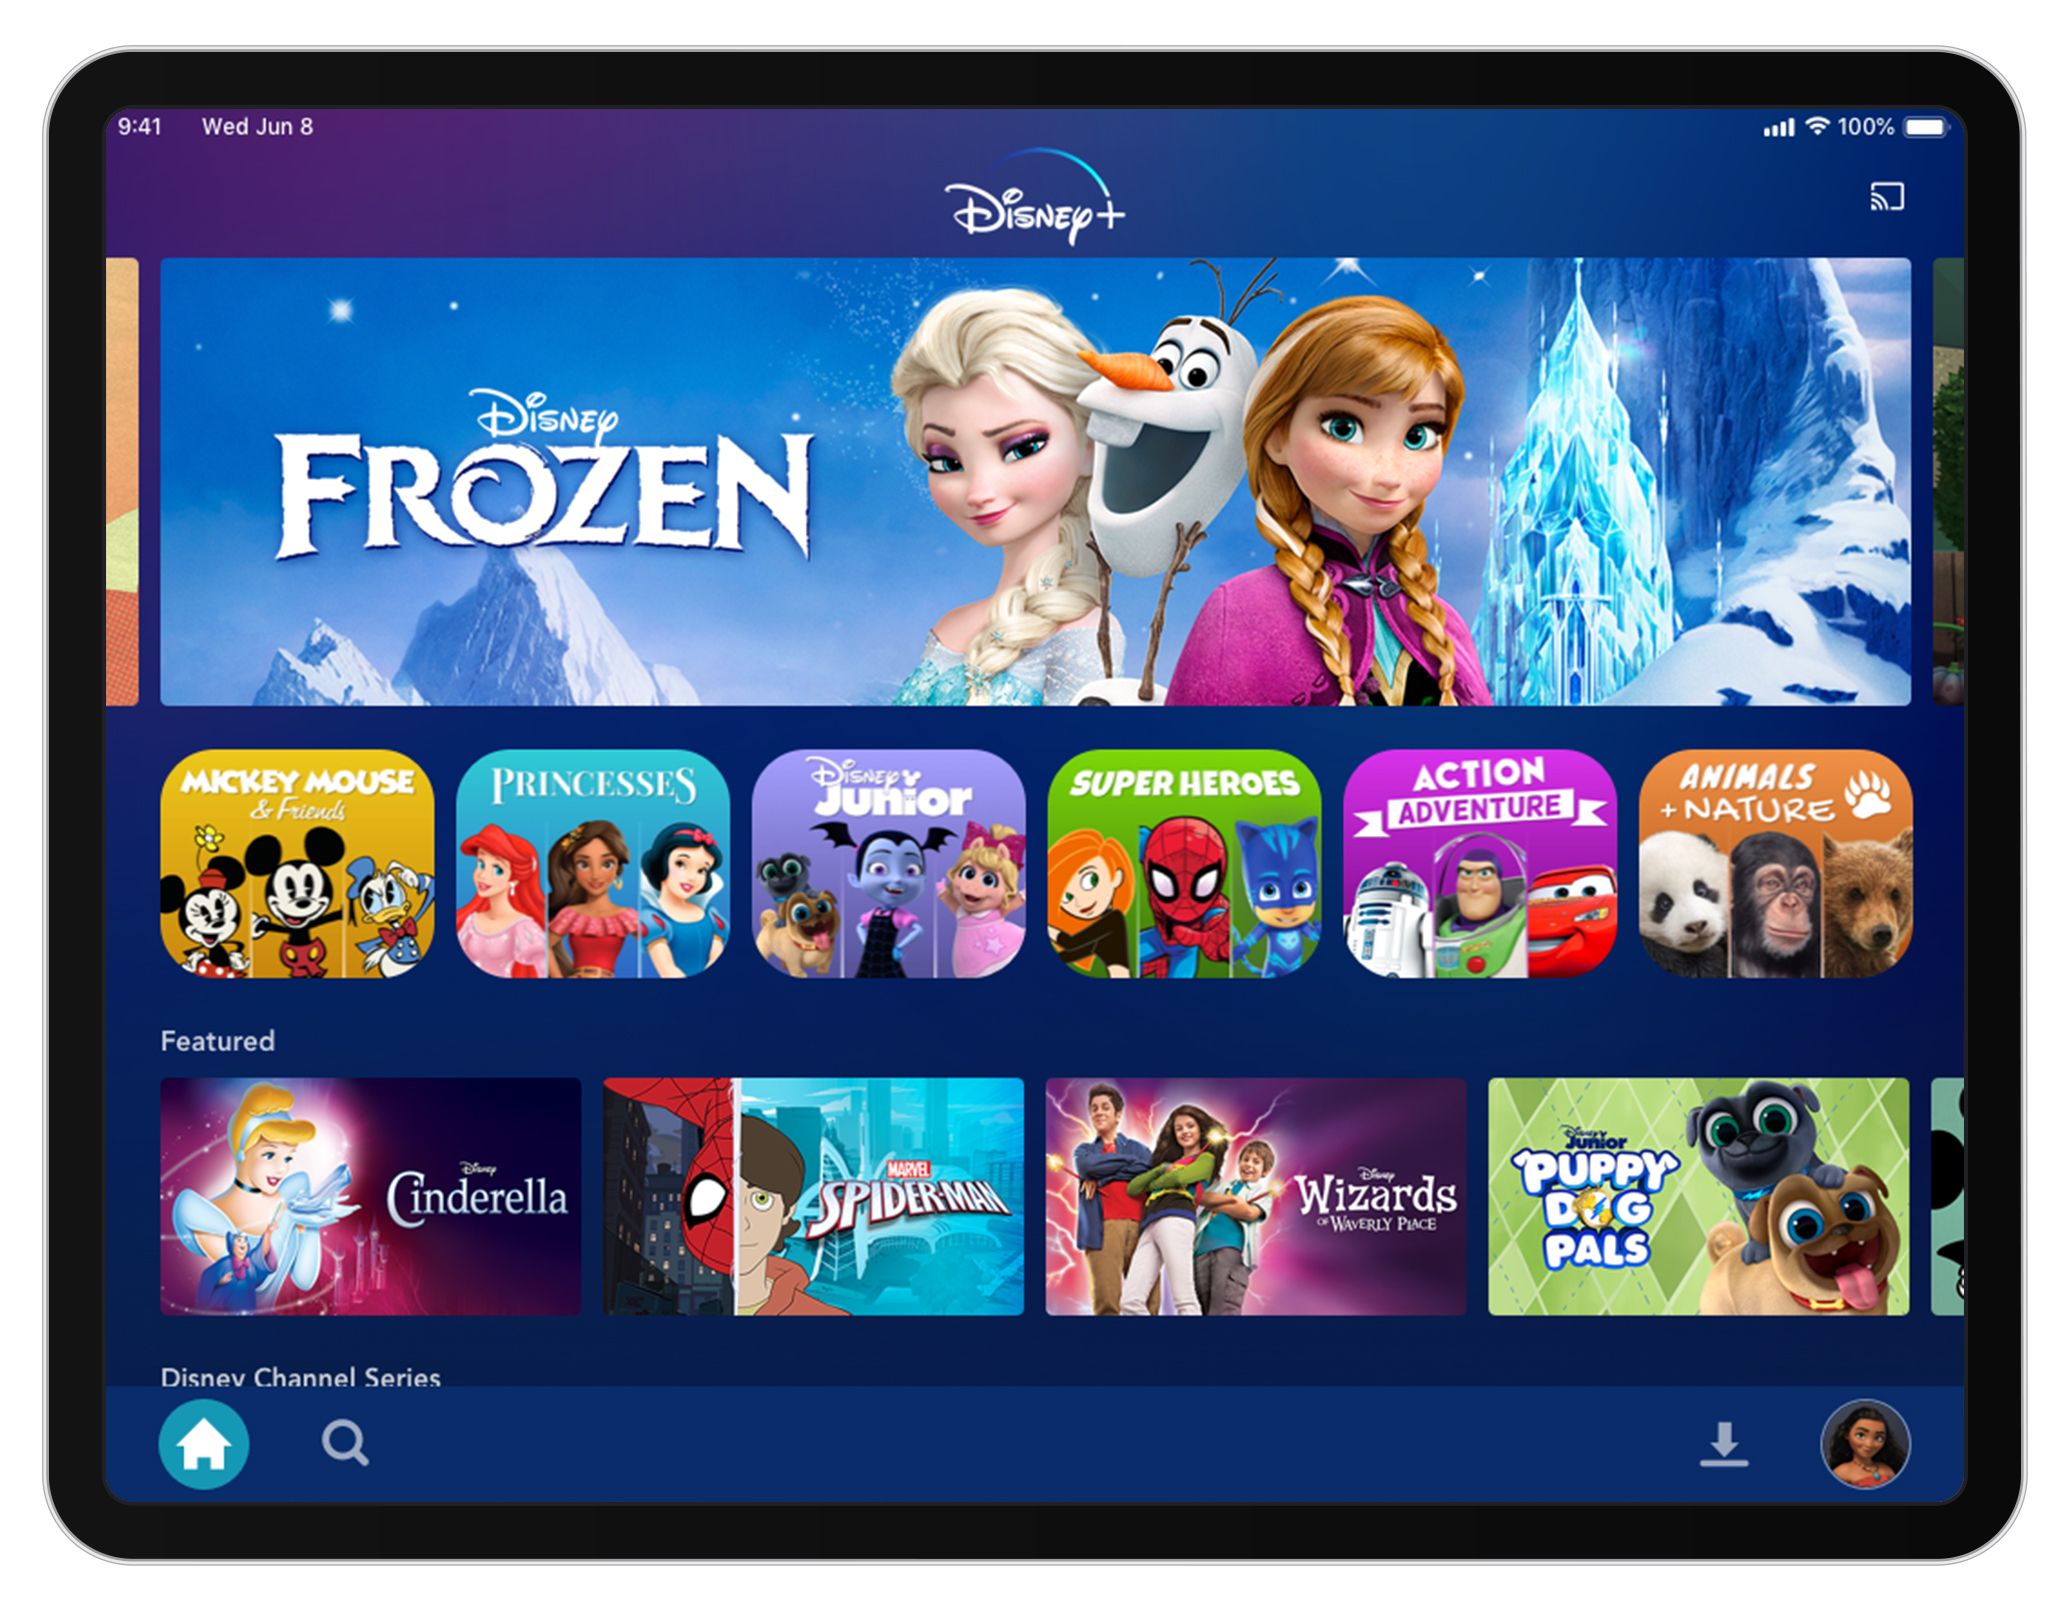 Disney Plus: How to Request TV Shows and Movies